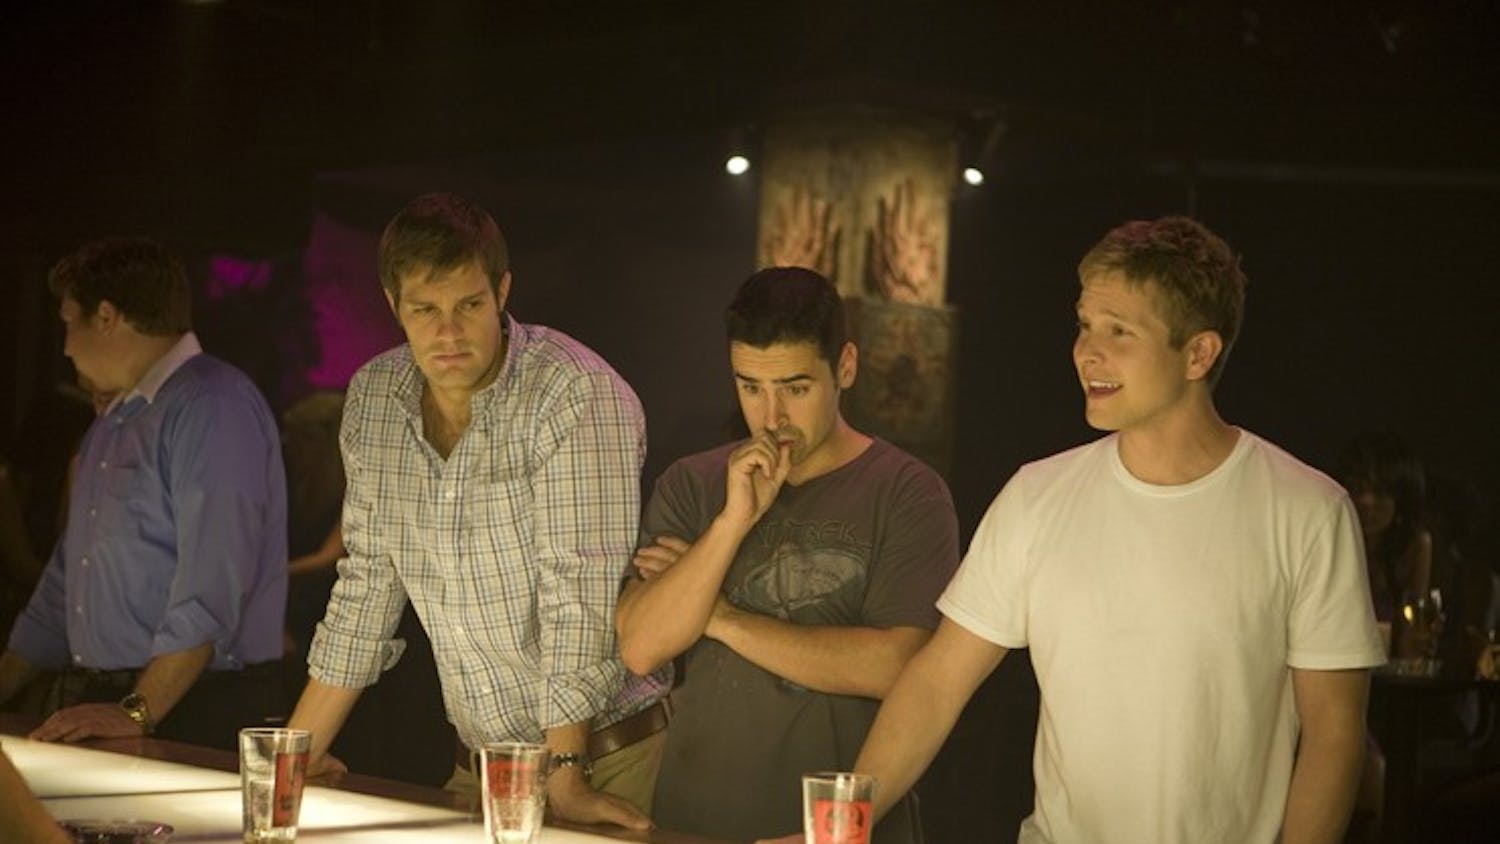 MAXED OUT â€” The film adaptation of part of Tucker Maxâ€™s best-selling novel â€œI Hope They Serve Beer in Hellâ€ is set to hit theaters Friday, Sept. 25. Matt Czuchry plays Max (right) while actors Jesse Bradford (middle) and Geoff Stults (left) play his friends Slingblade and Dan. Max has become famous for his sexually-explicit and hilarious stories of drinking and debauchery. He went on a nationwide tour to promote the film in various cities.